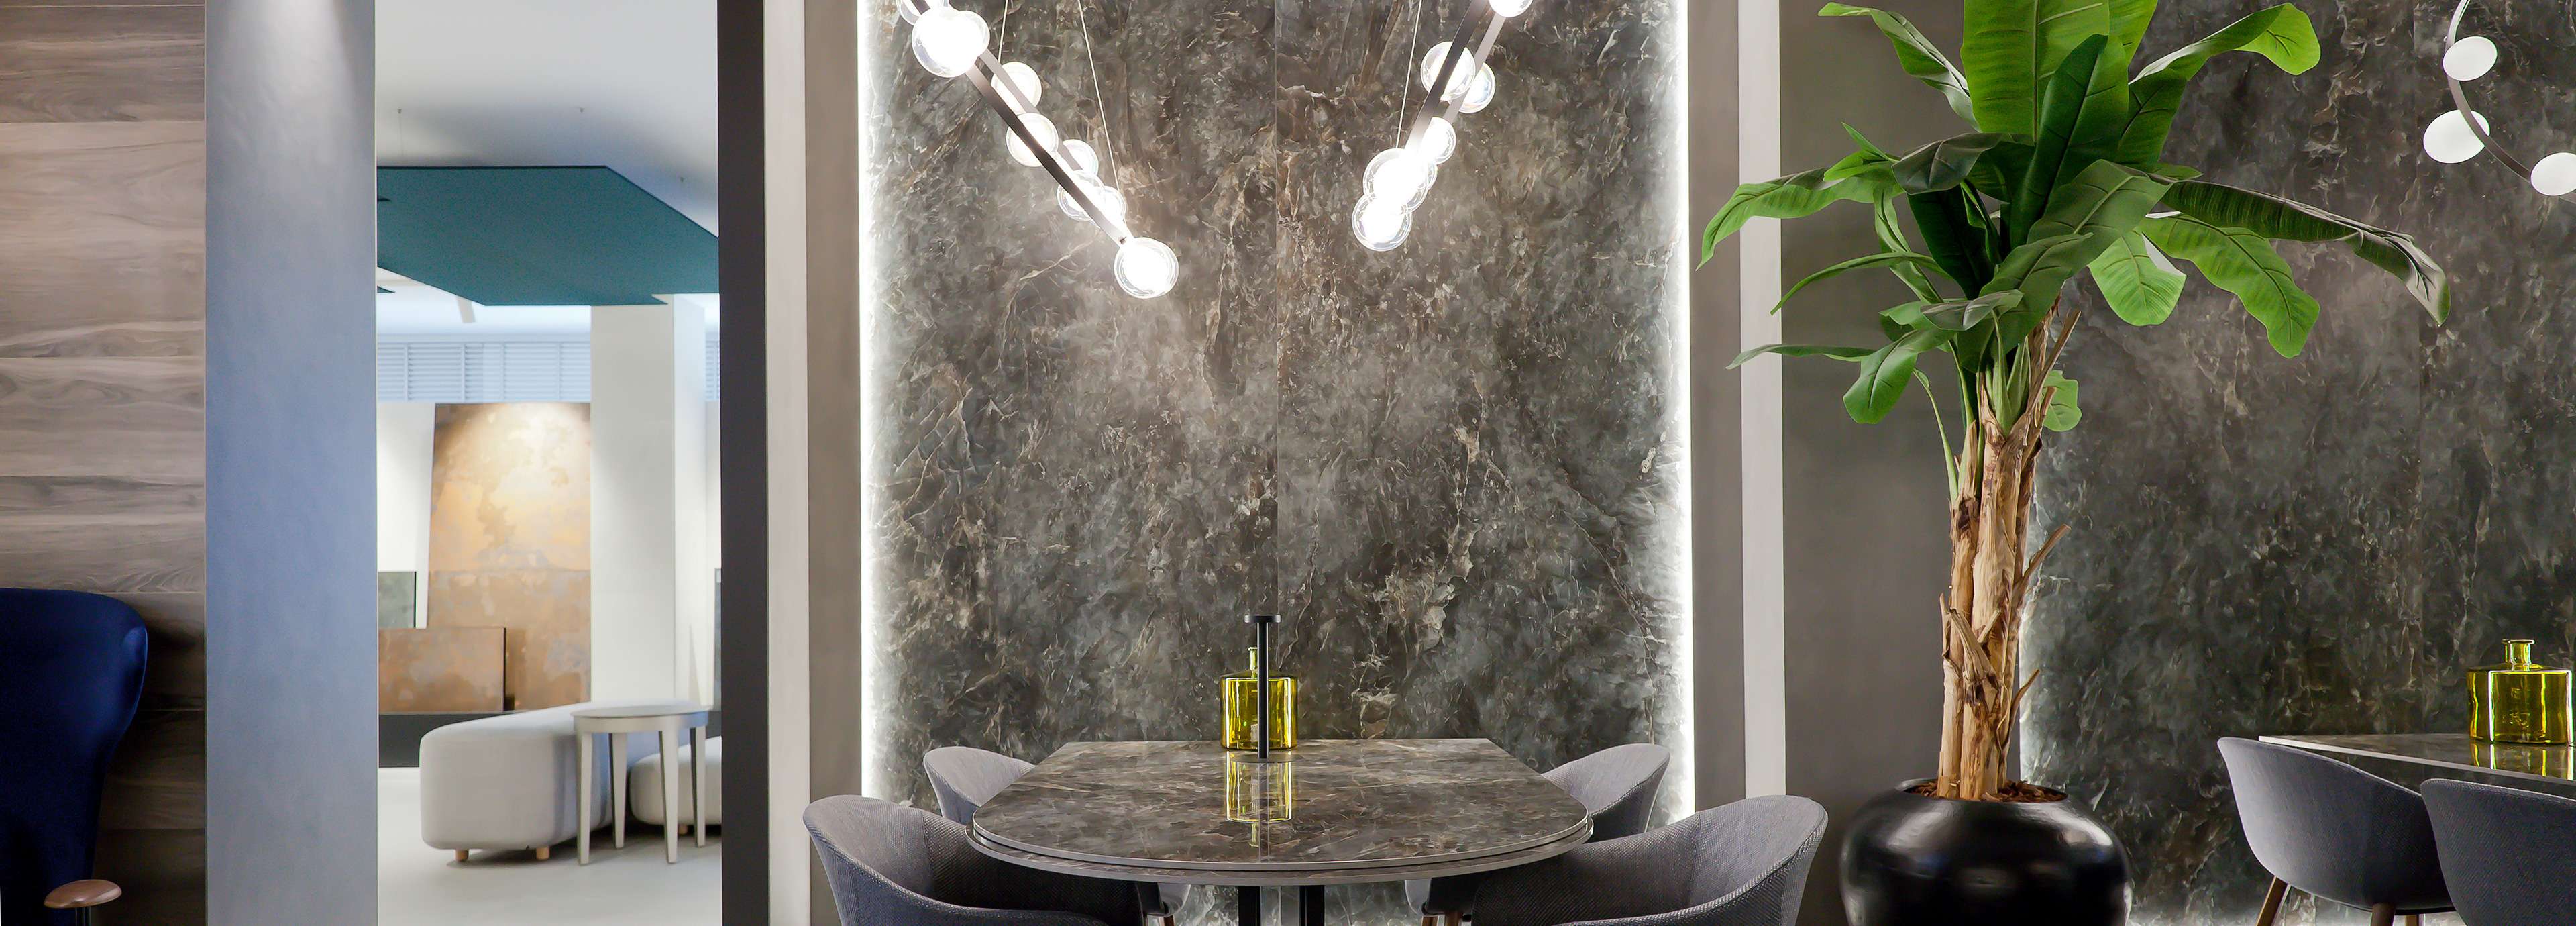 Labradorite wall cladding and table top ceramic